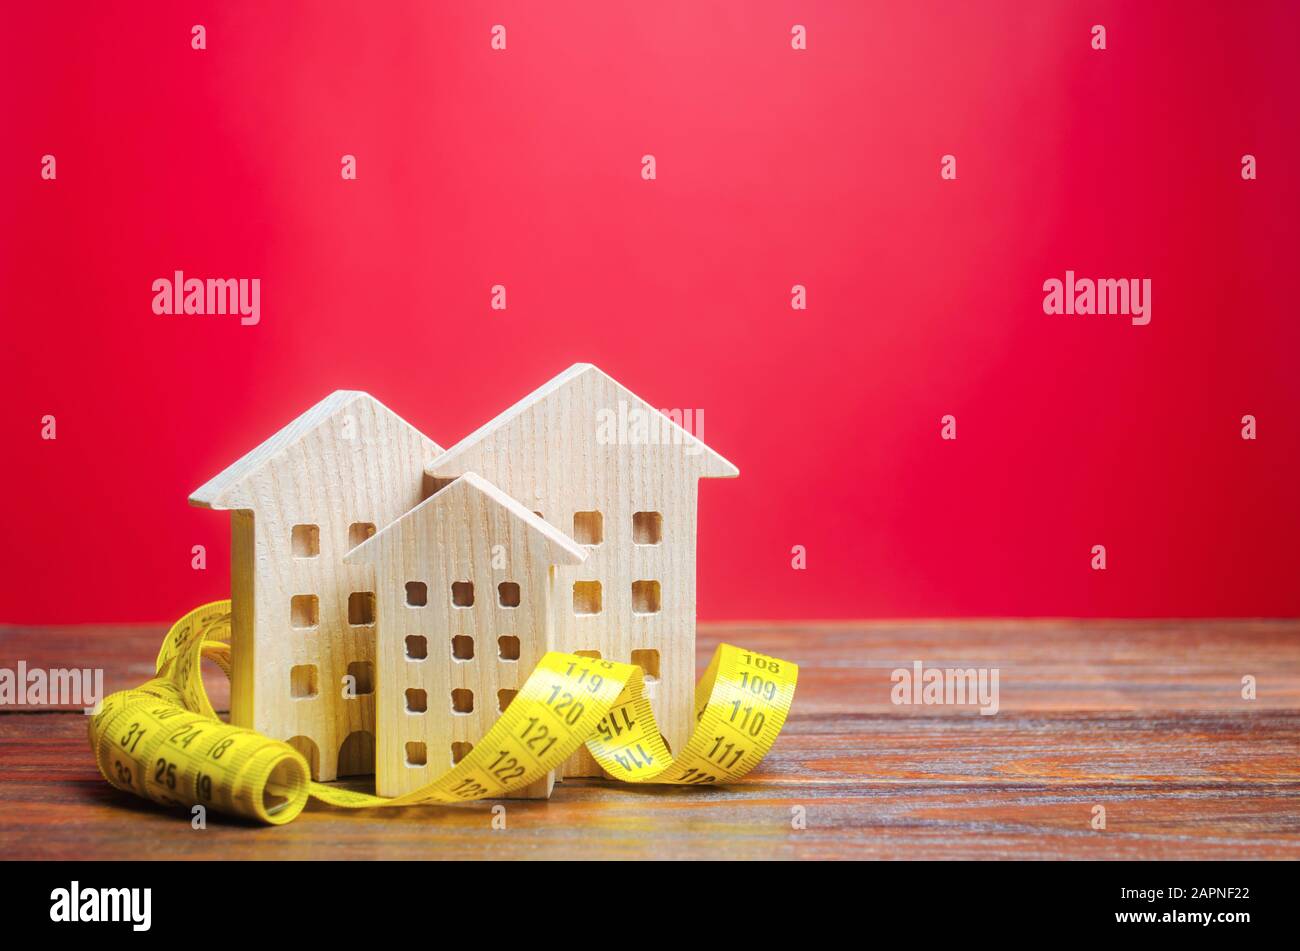 Miniature wooden houses and measuring tape. Home appraisal and property valuation concept. Housing construction, repair and maintenance. Real estate a Stock Photo